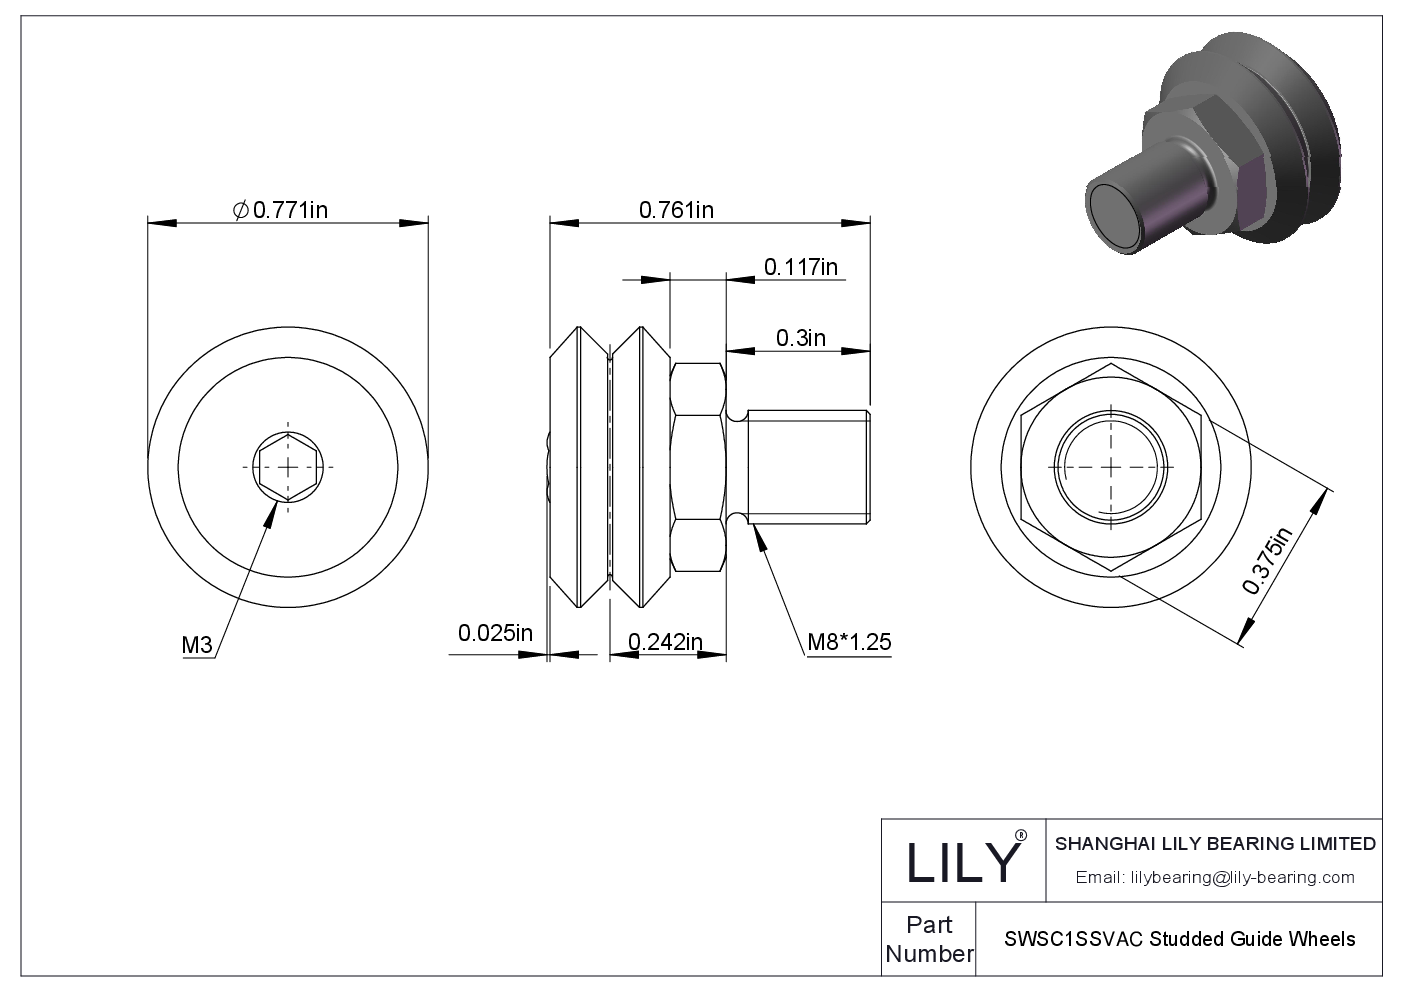 SWSC1SSVAC Studded Guide Wheels cad drawing